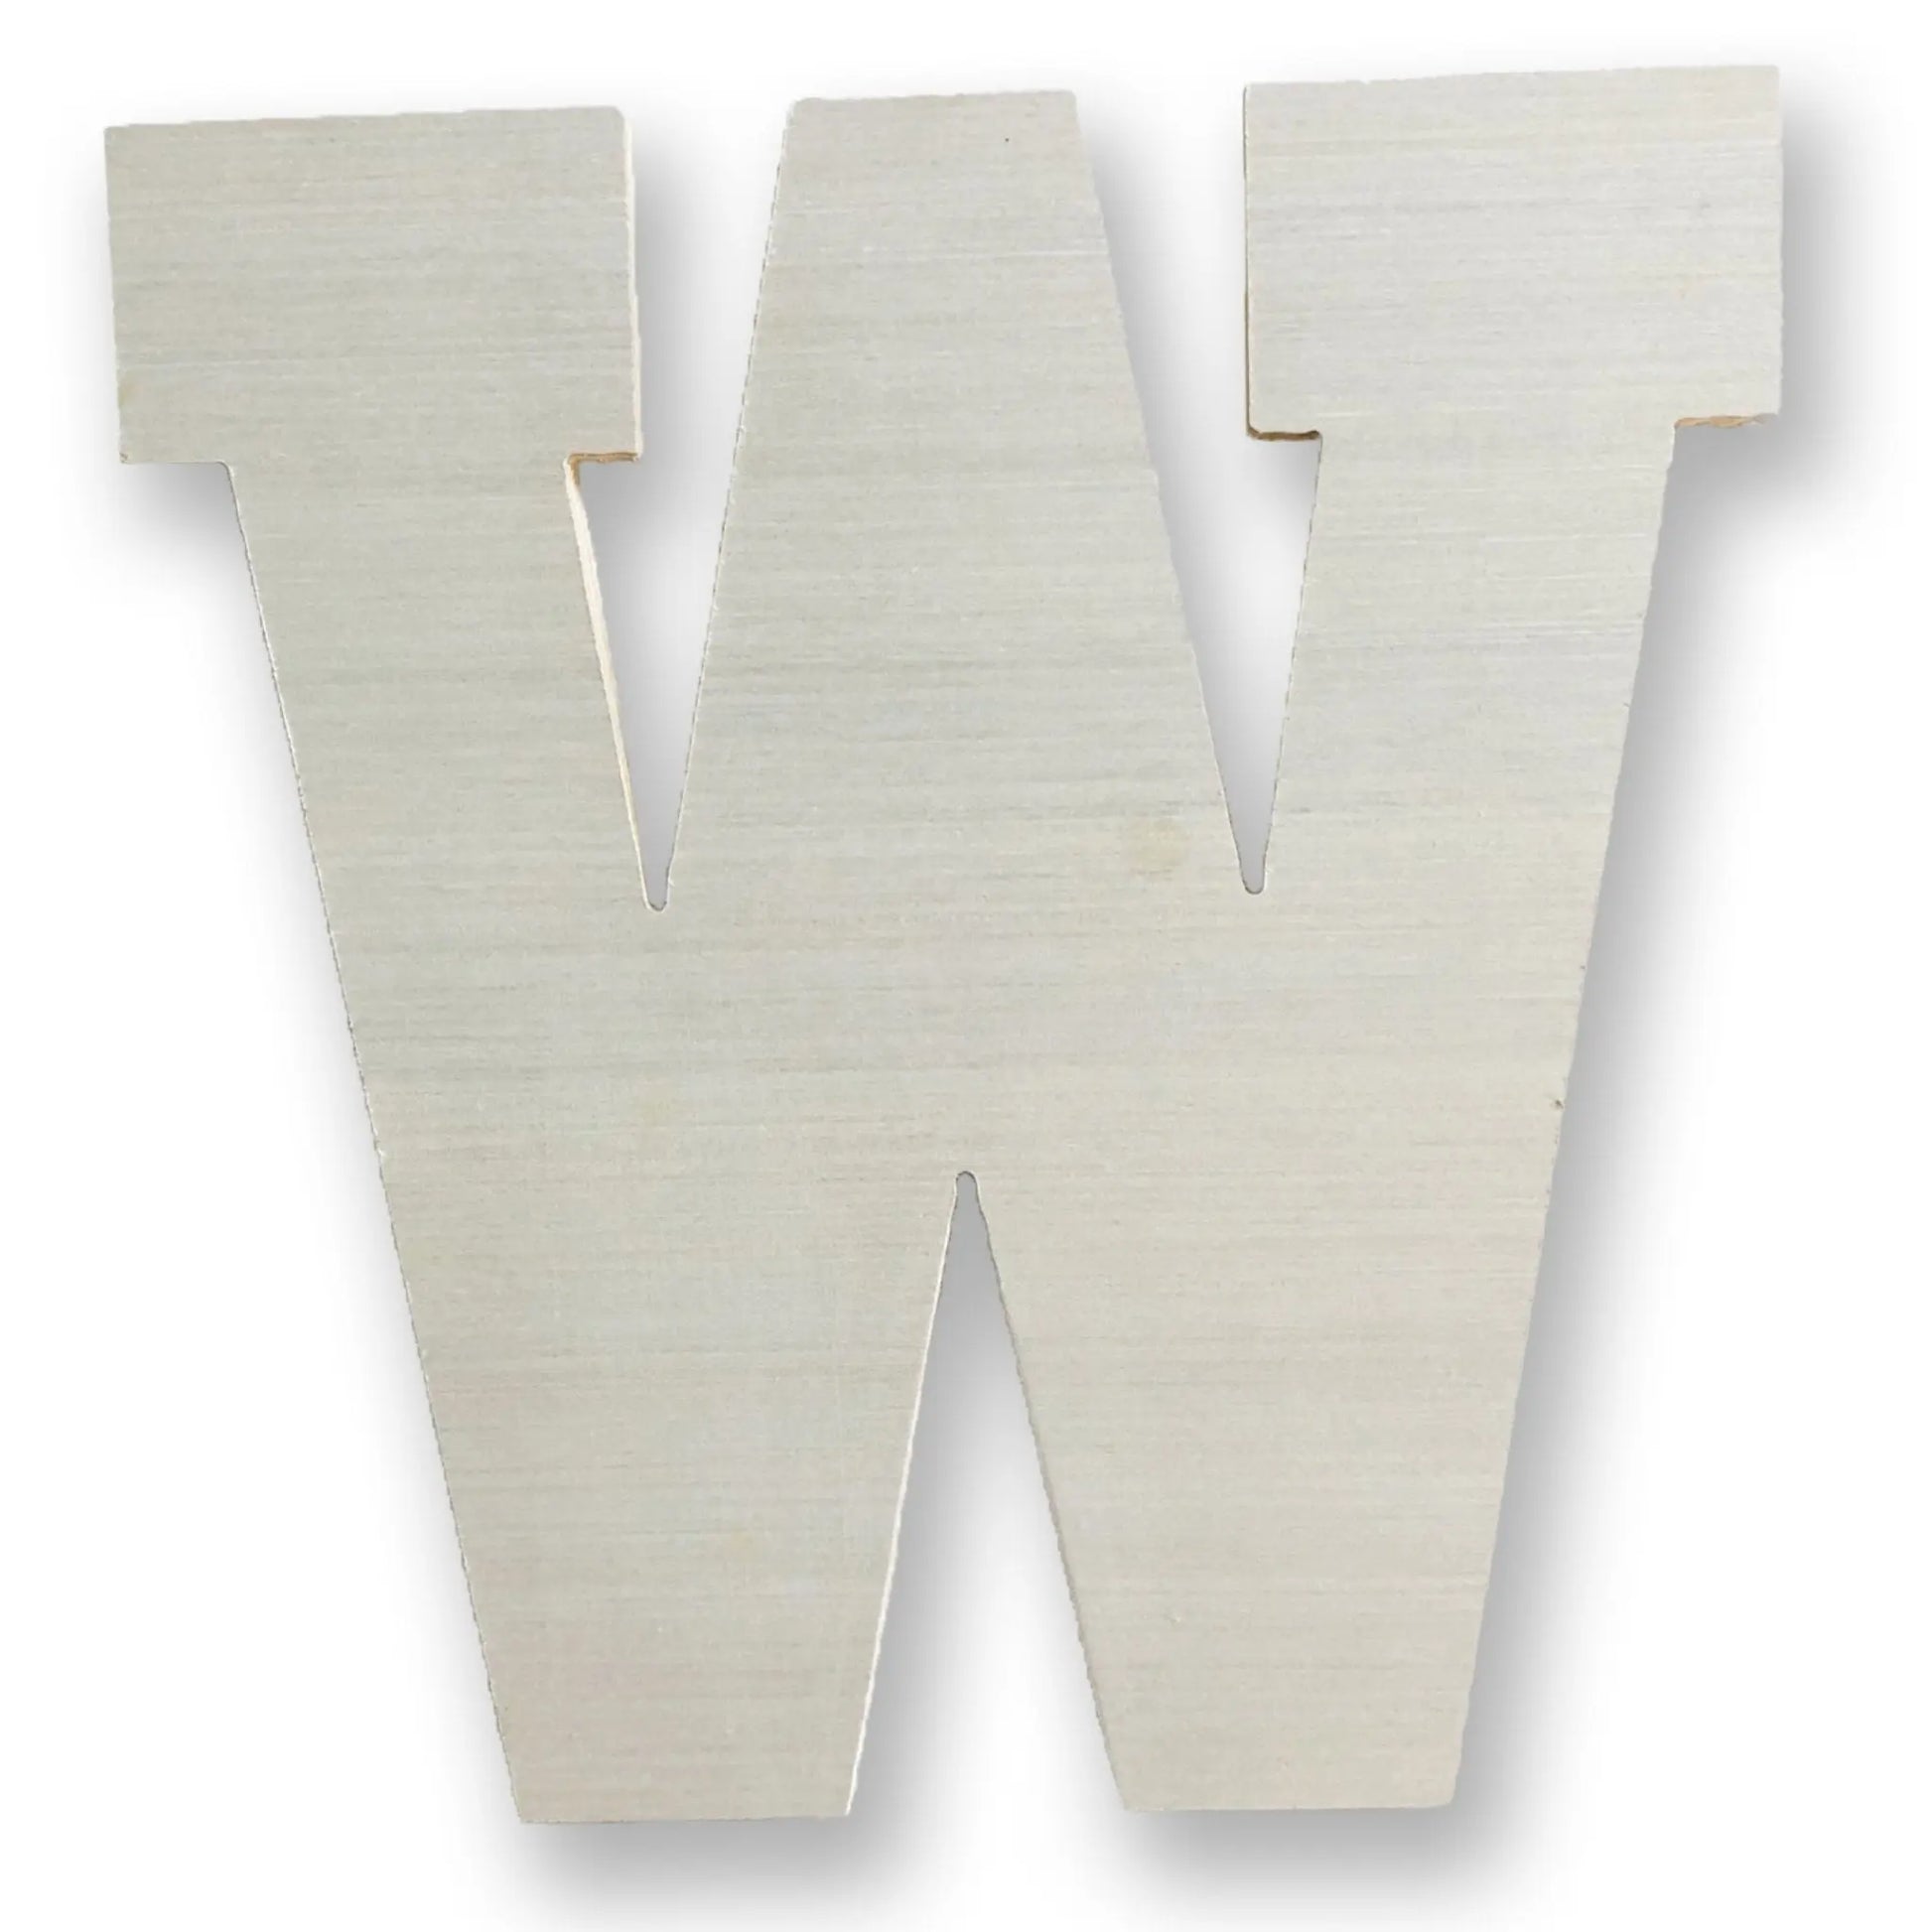 Large Wooden Letter W | Large Letter W Wall Decor - collageandwood